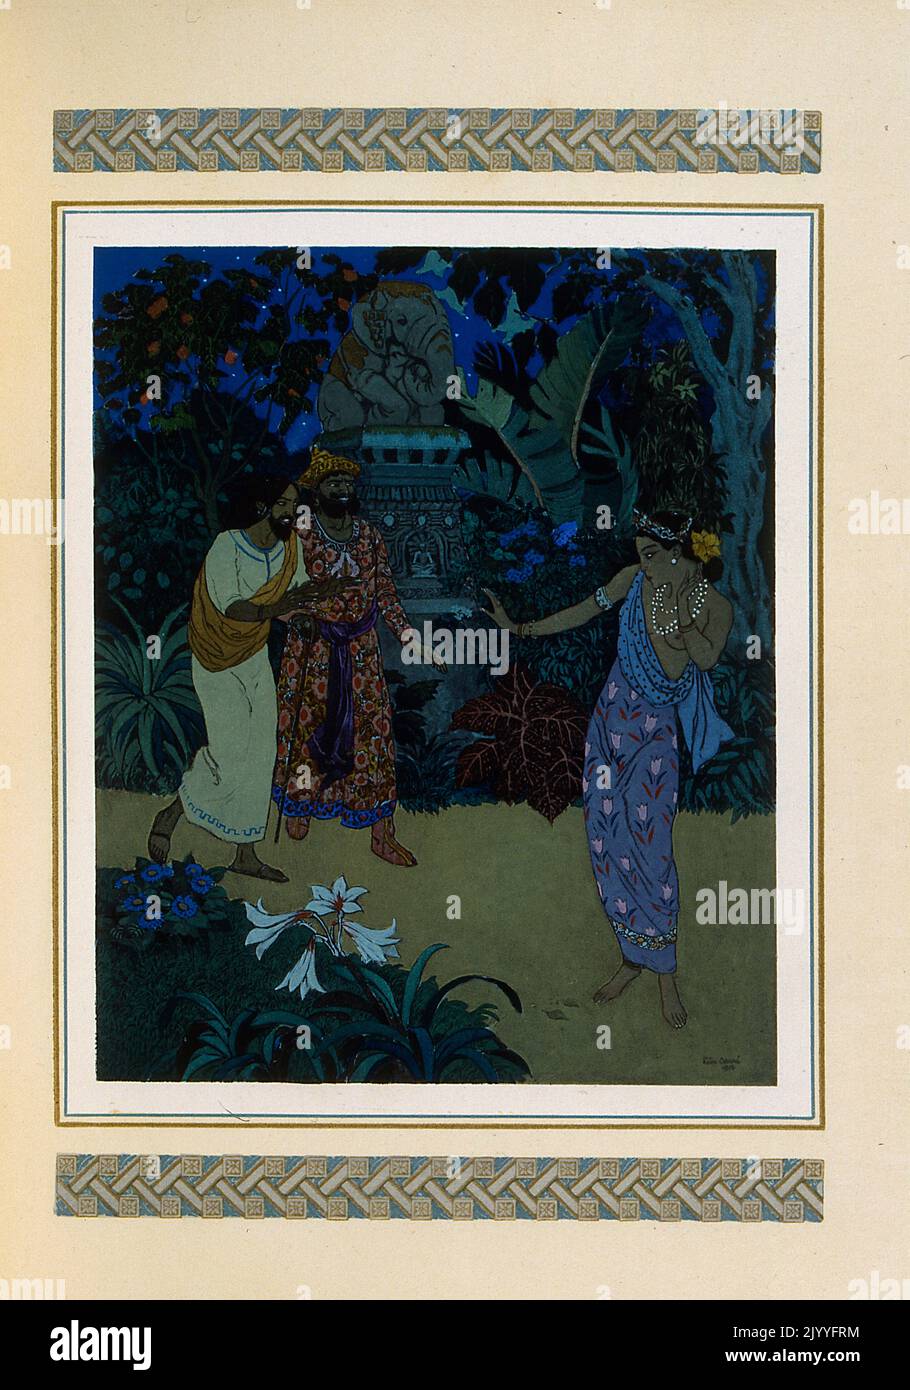 Coloured Illustration of two suitors amusing a young woman who gestures coyly. Illustrated by Edmund Dulac (1882-1953), a French British naturalised magazine and book illustrator. Stock Photo